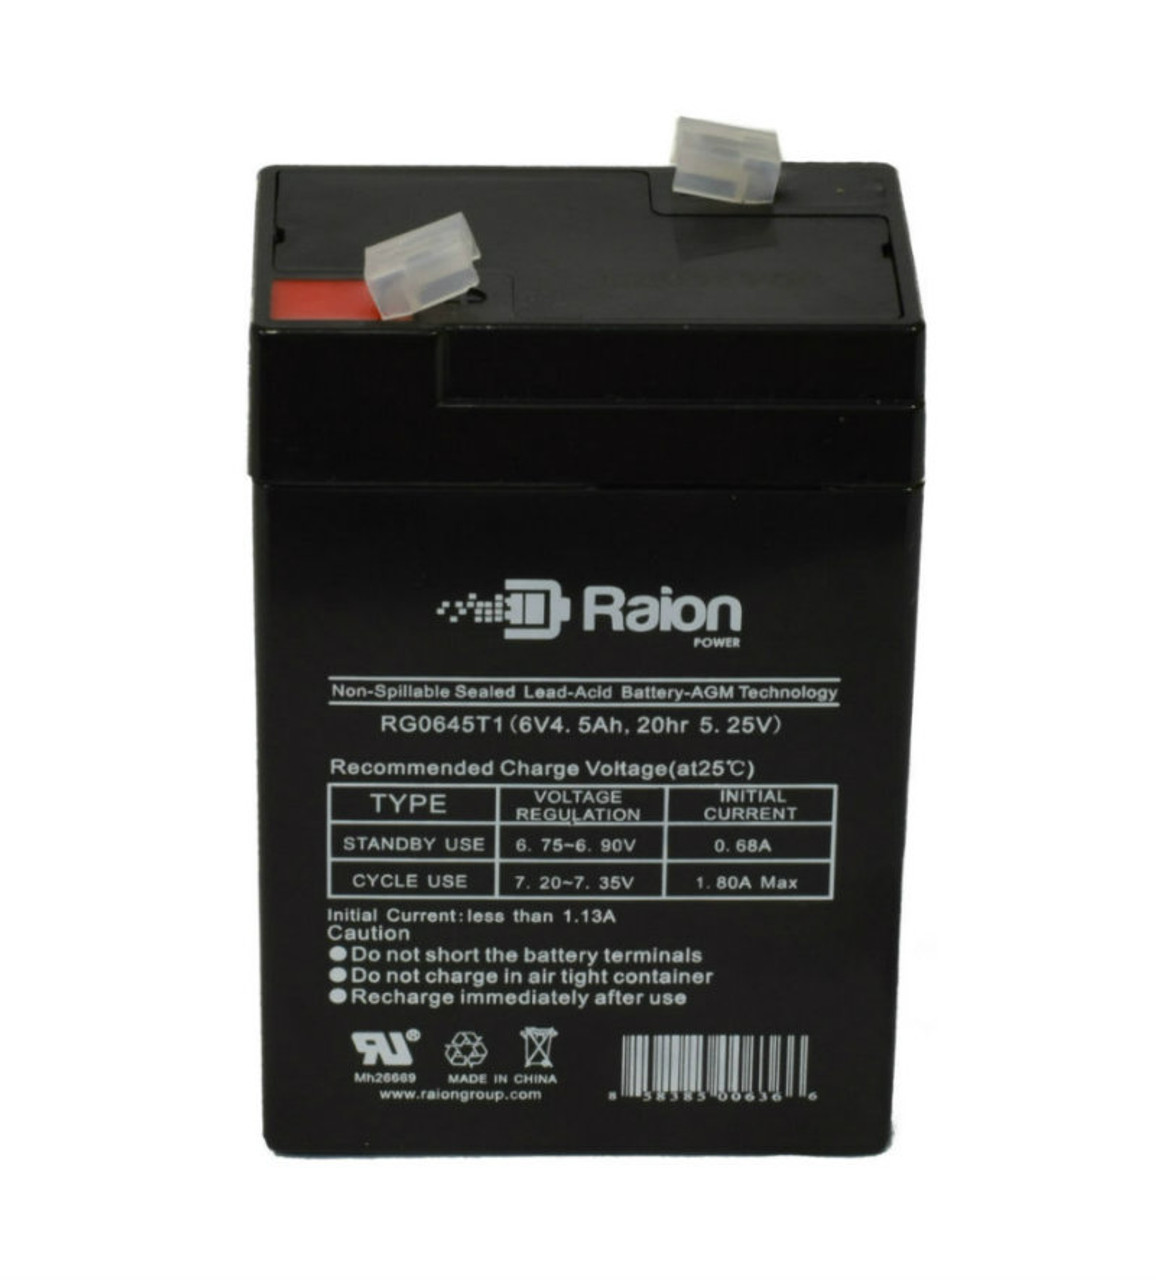 Raion Power RG0645T1 Replacement Battery Cartridge for Kweight Power KW 6-4